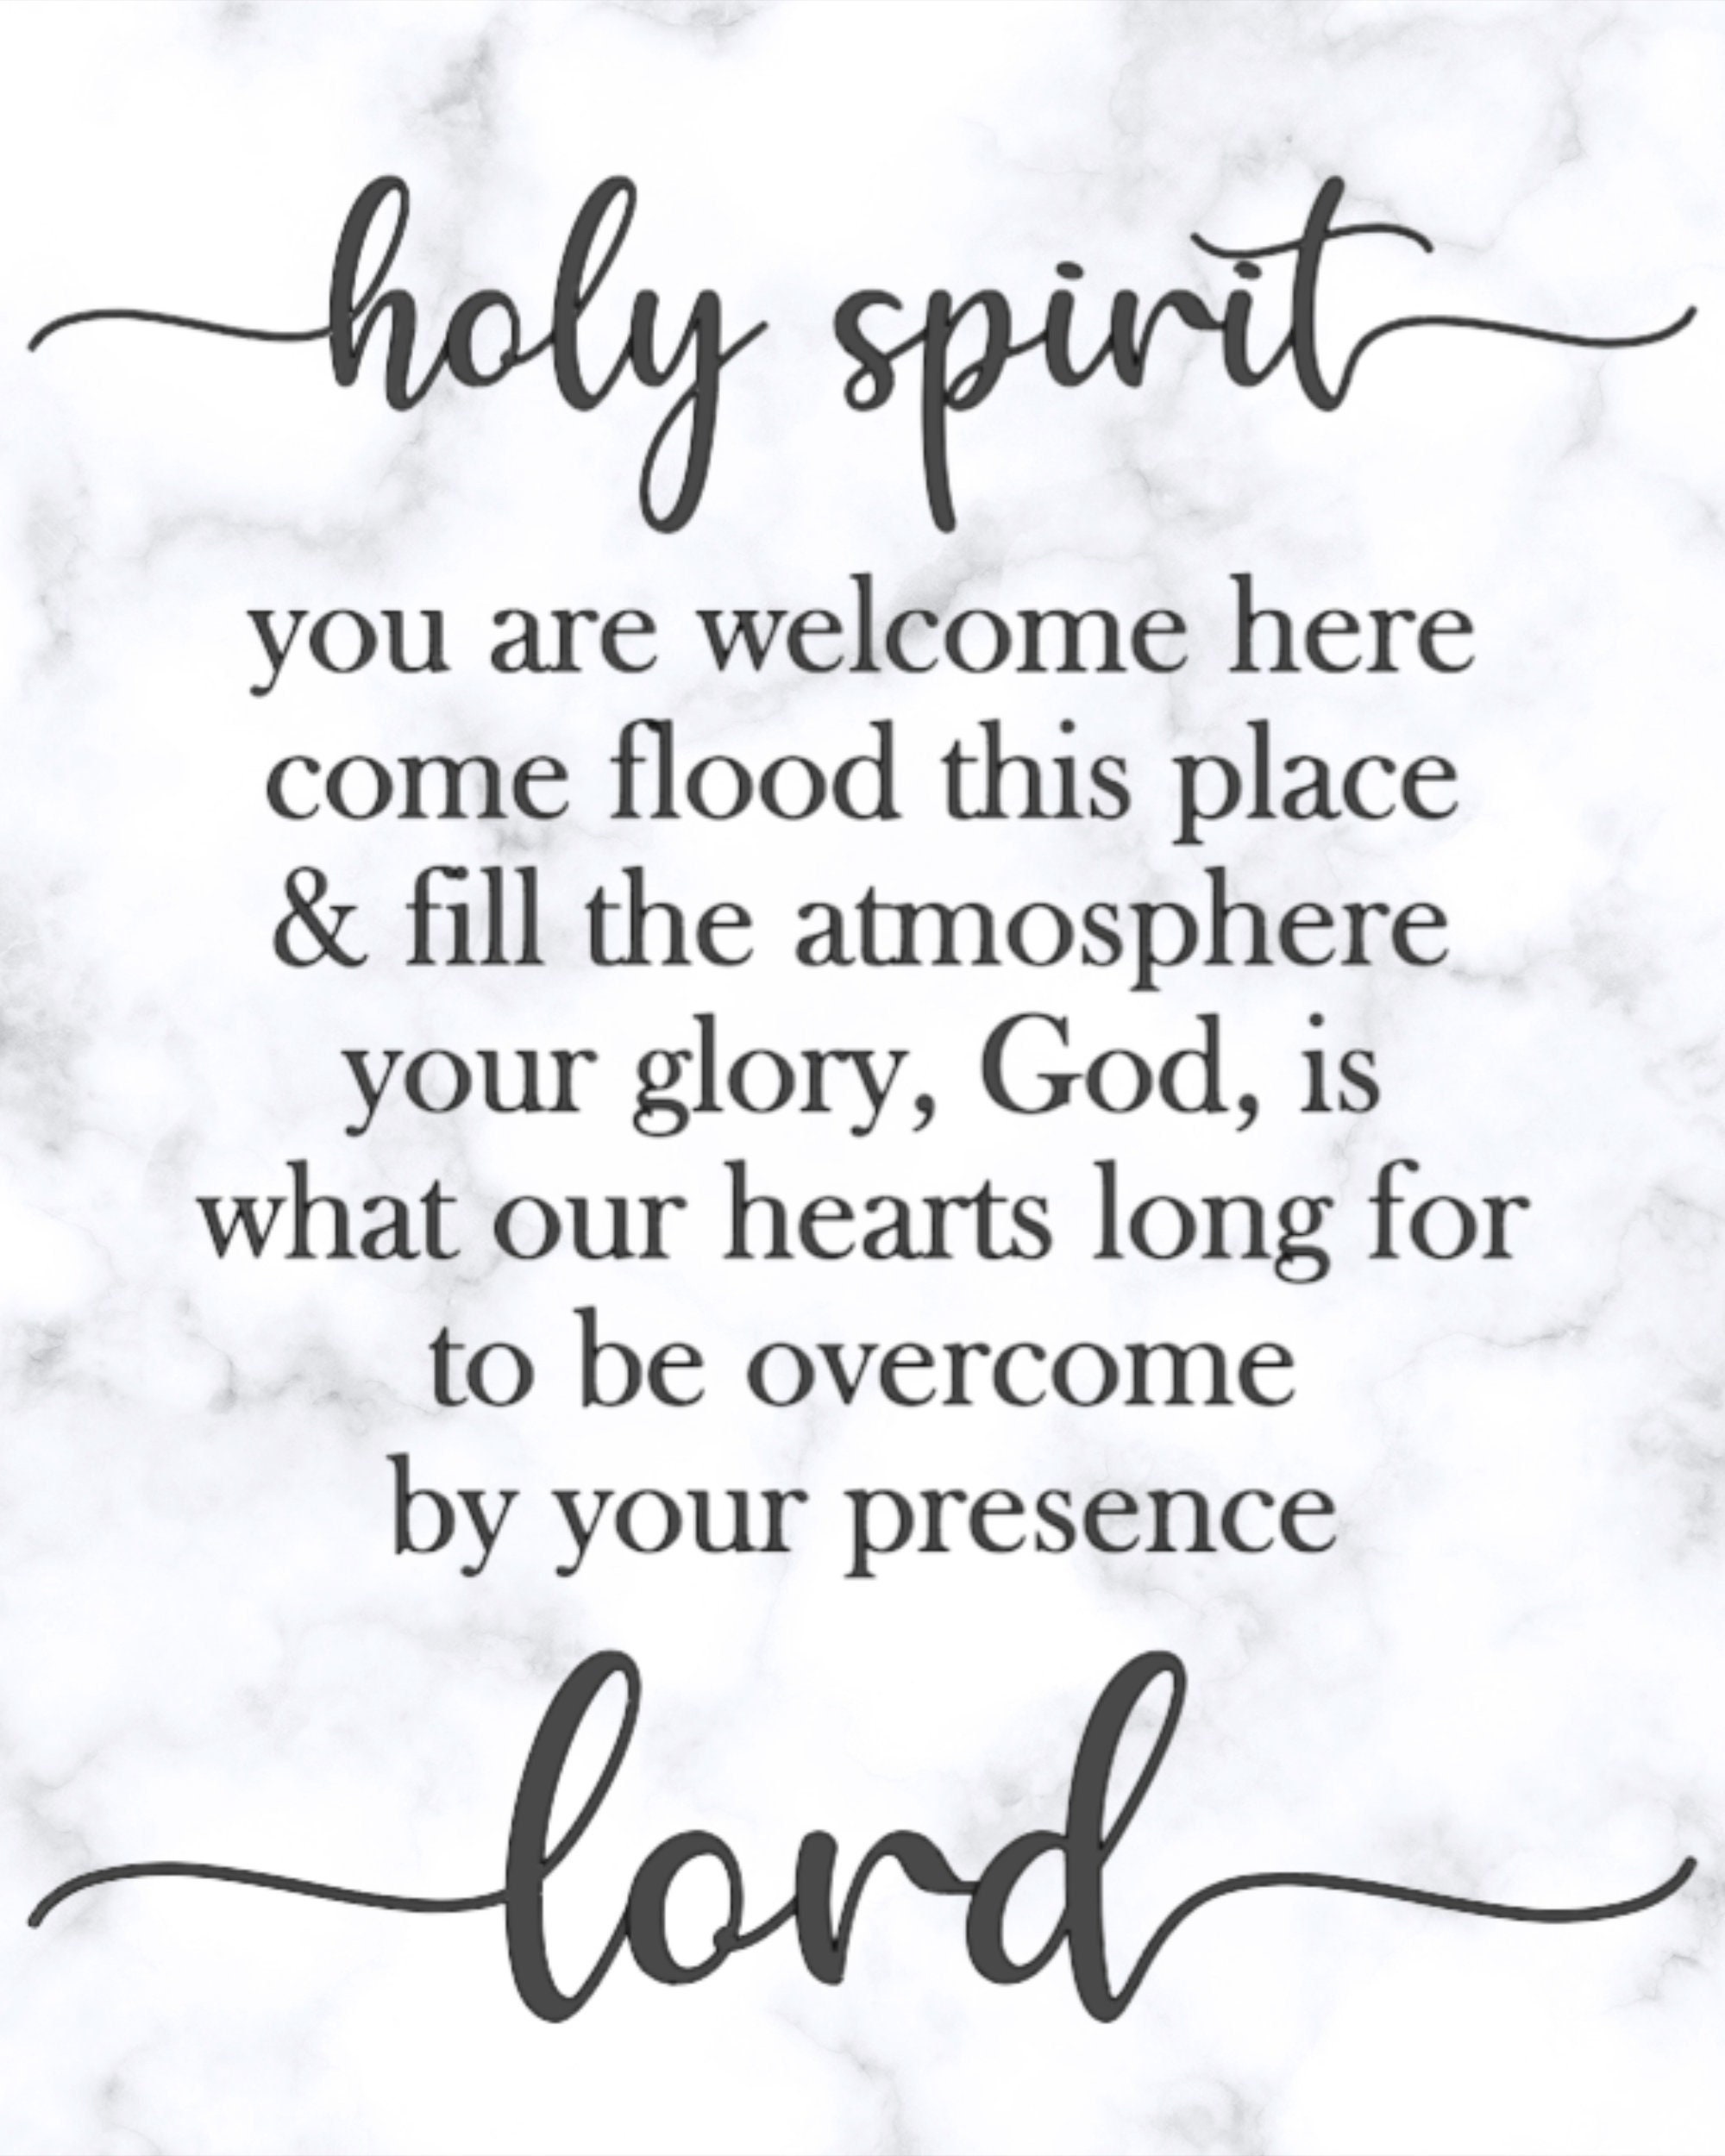 Holy Spirit You Are Welcome Here Lyrics SVG Cut File, Download - Etsy